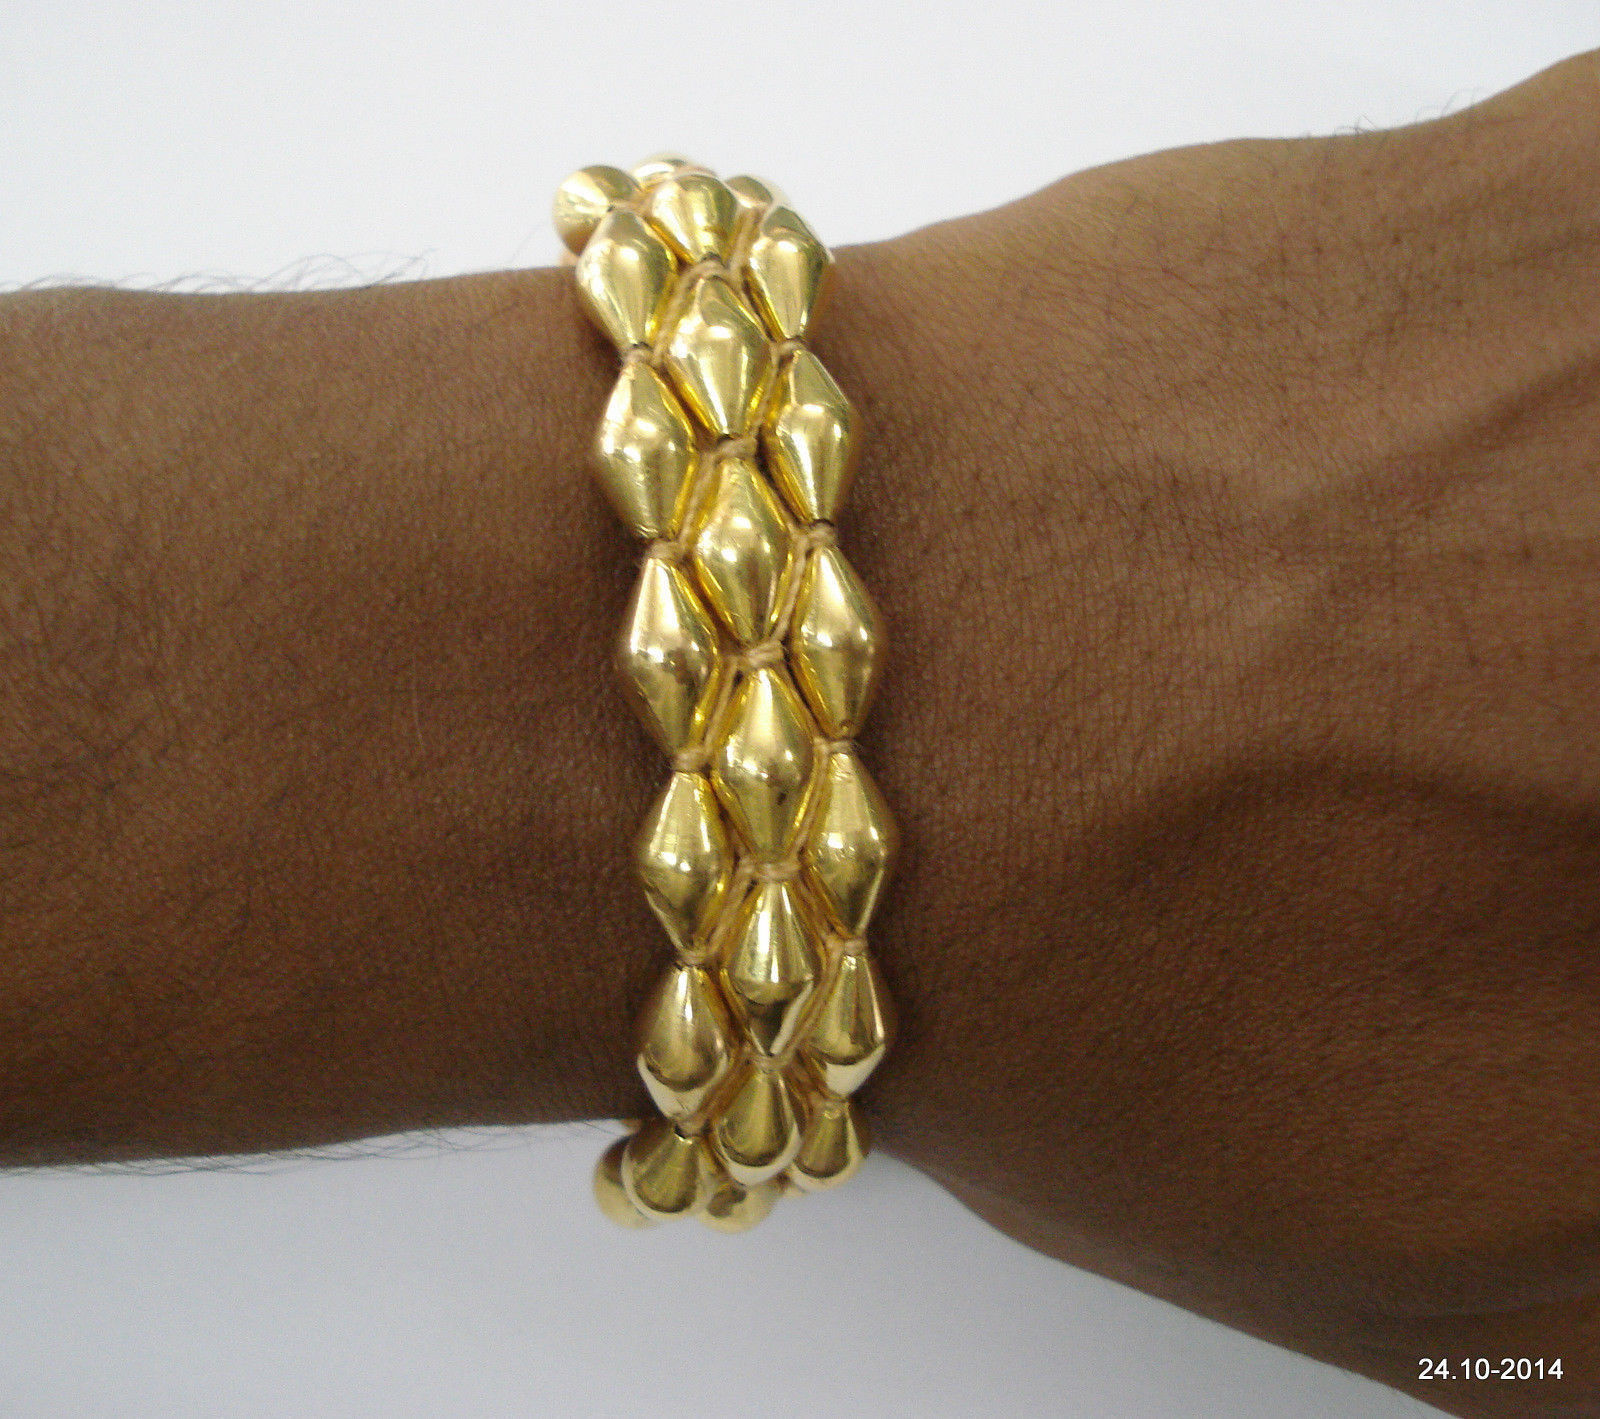 Primary image for vintage tribal 22k gold beads bracelet bangle handmade cuff jewelry